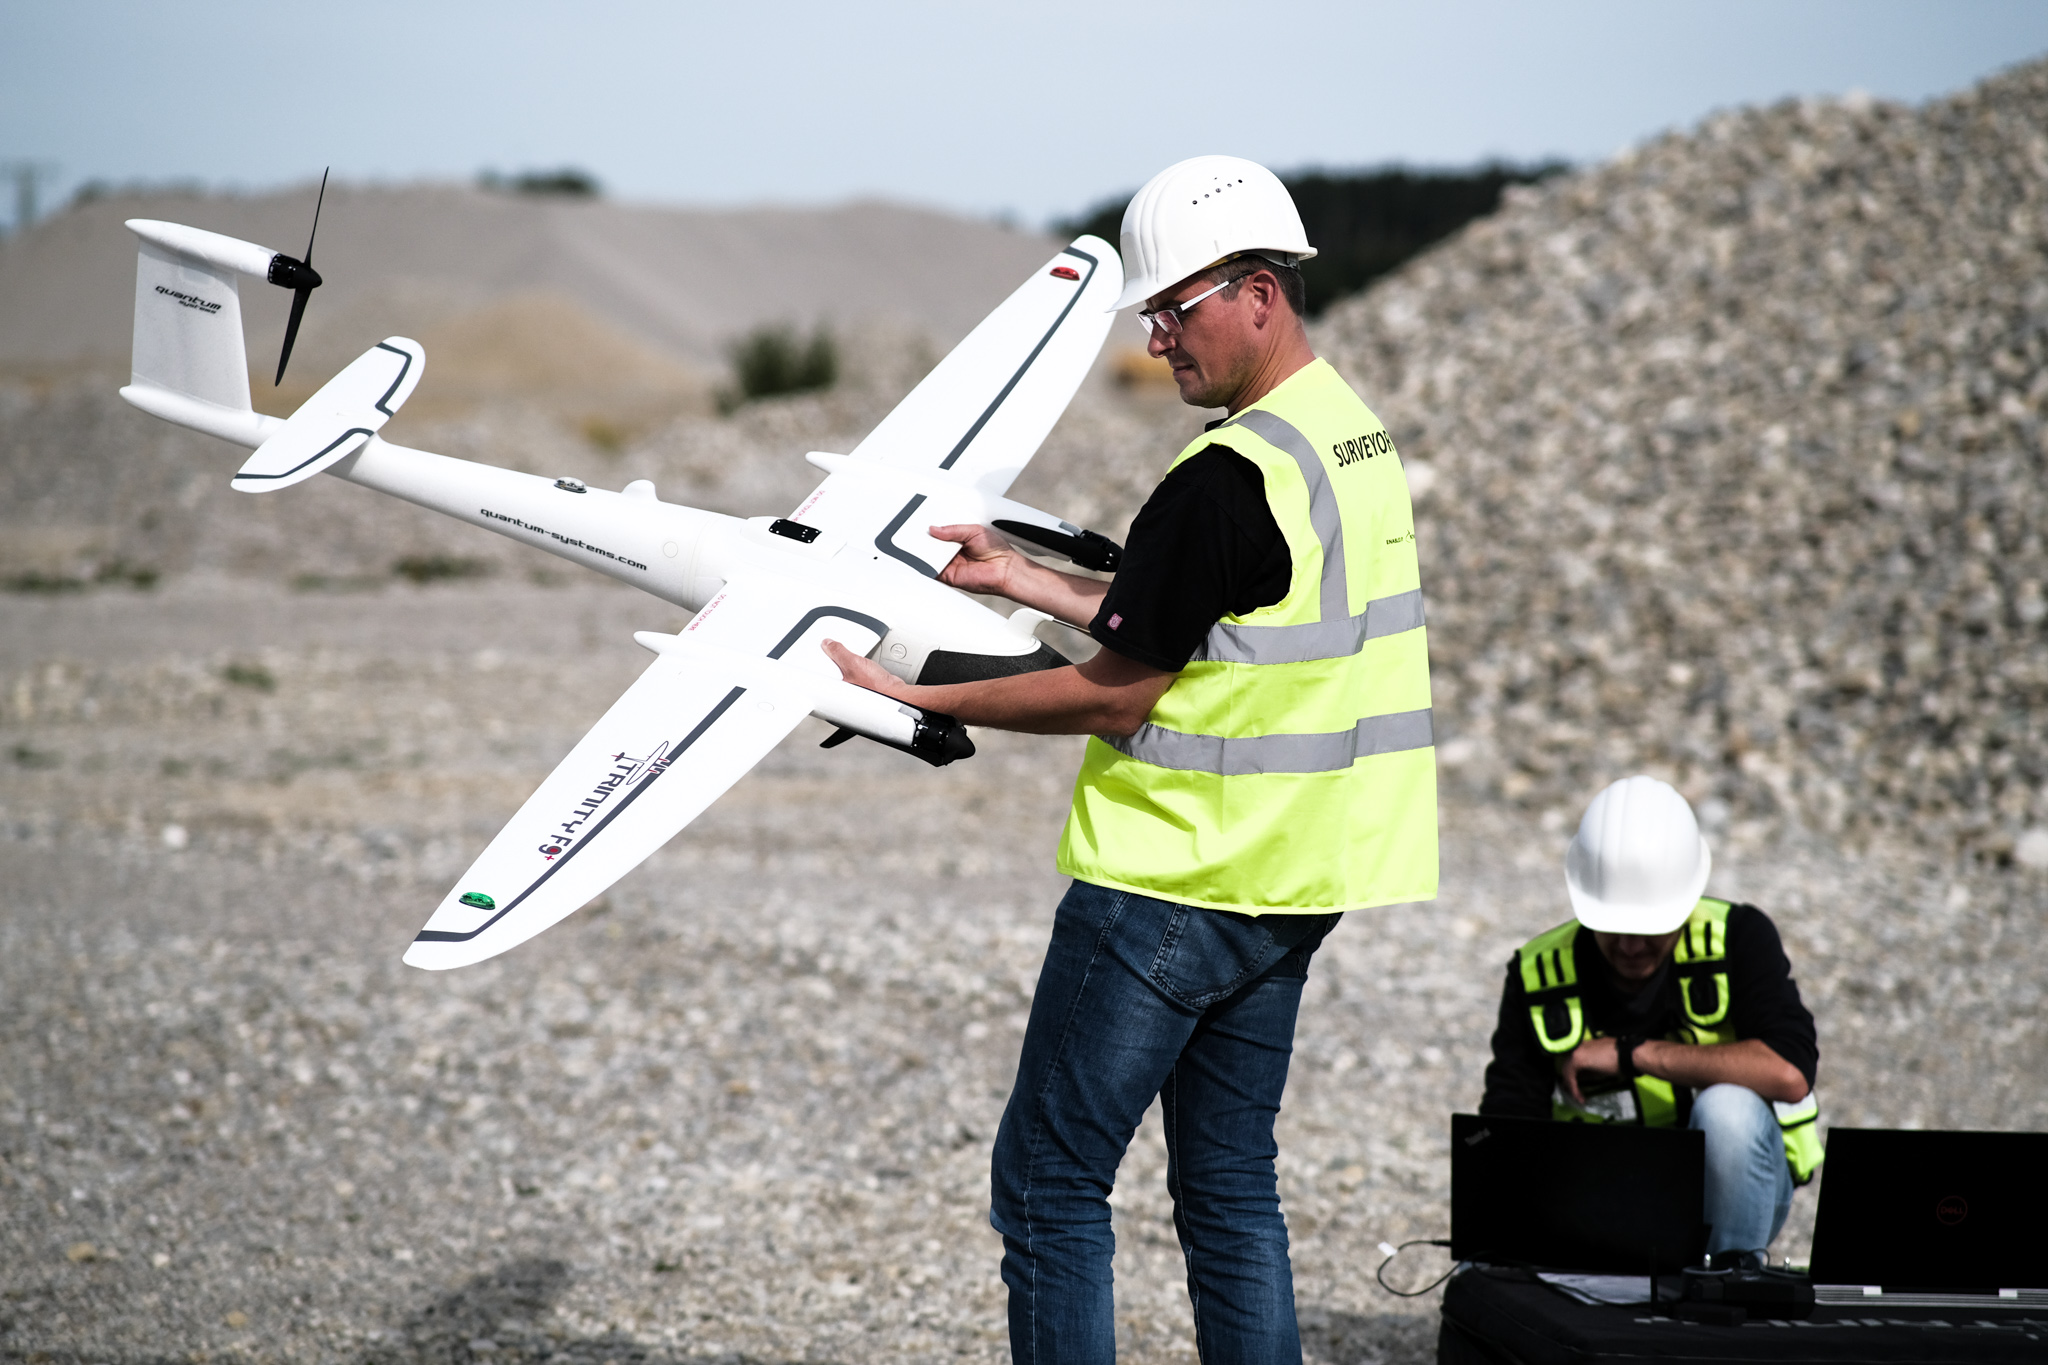 A Guide To Using Drones and LiDAR Technology for GIS Mapping